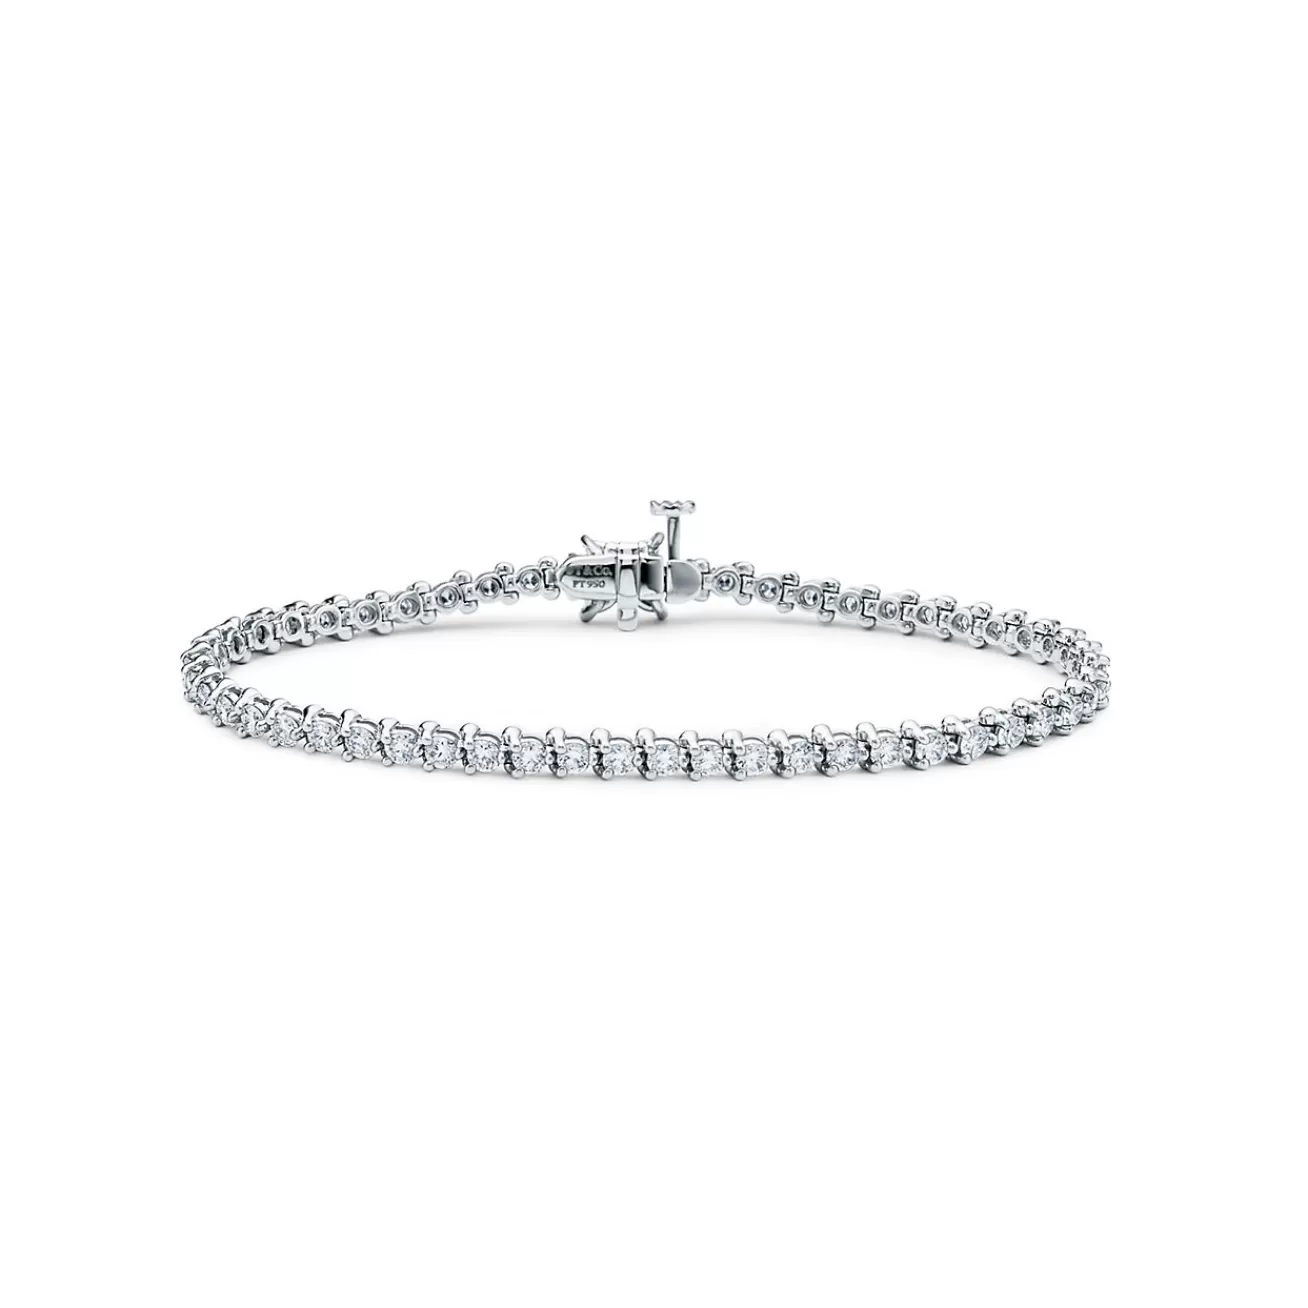 Tiffany & Co. Tiffany Victoria® Tennis Bracelet in Platinum with Diamonds | ^ Bracelets | Gifts for Her